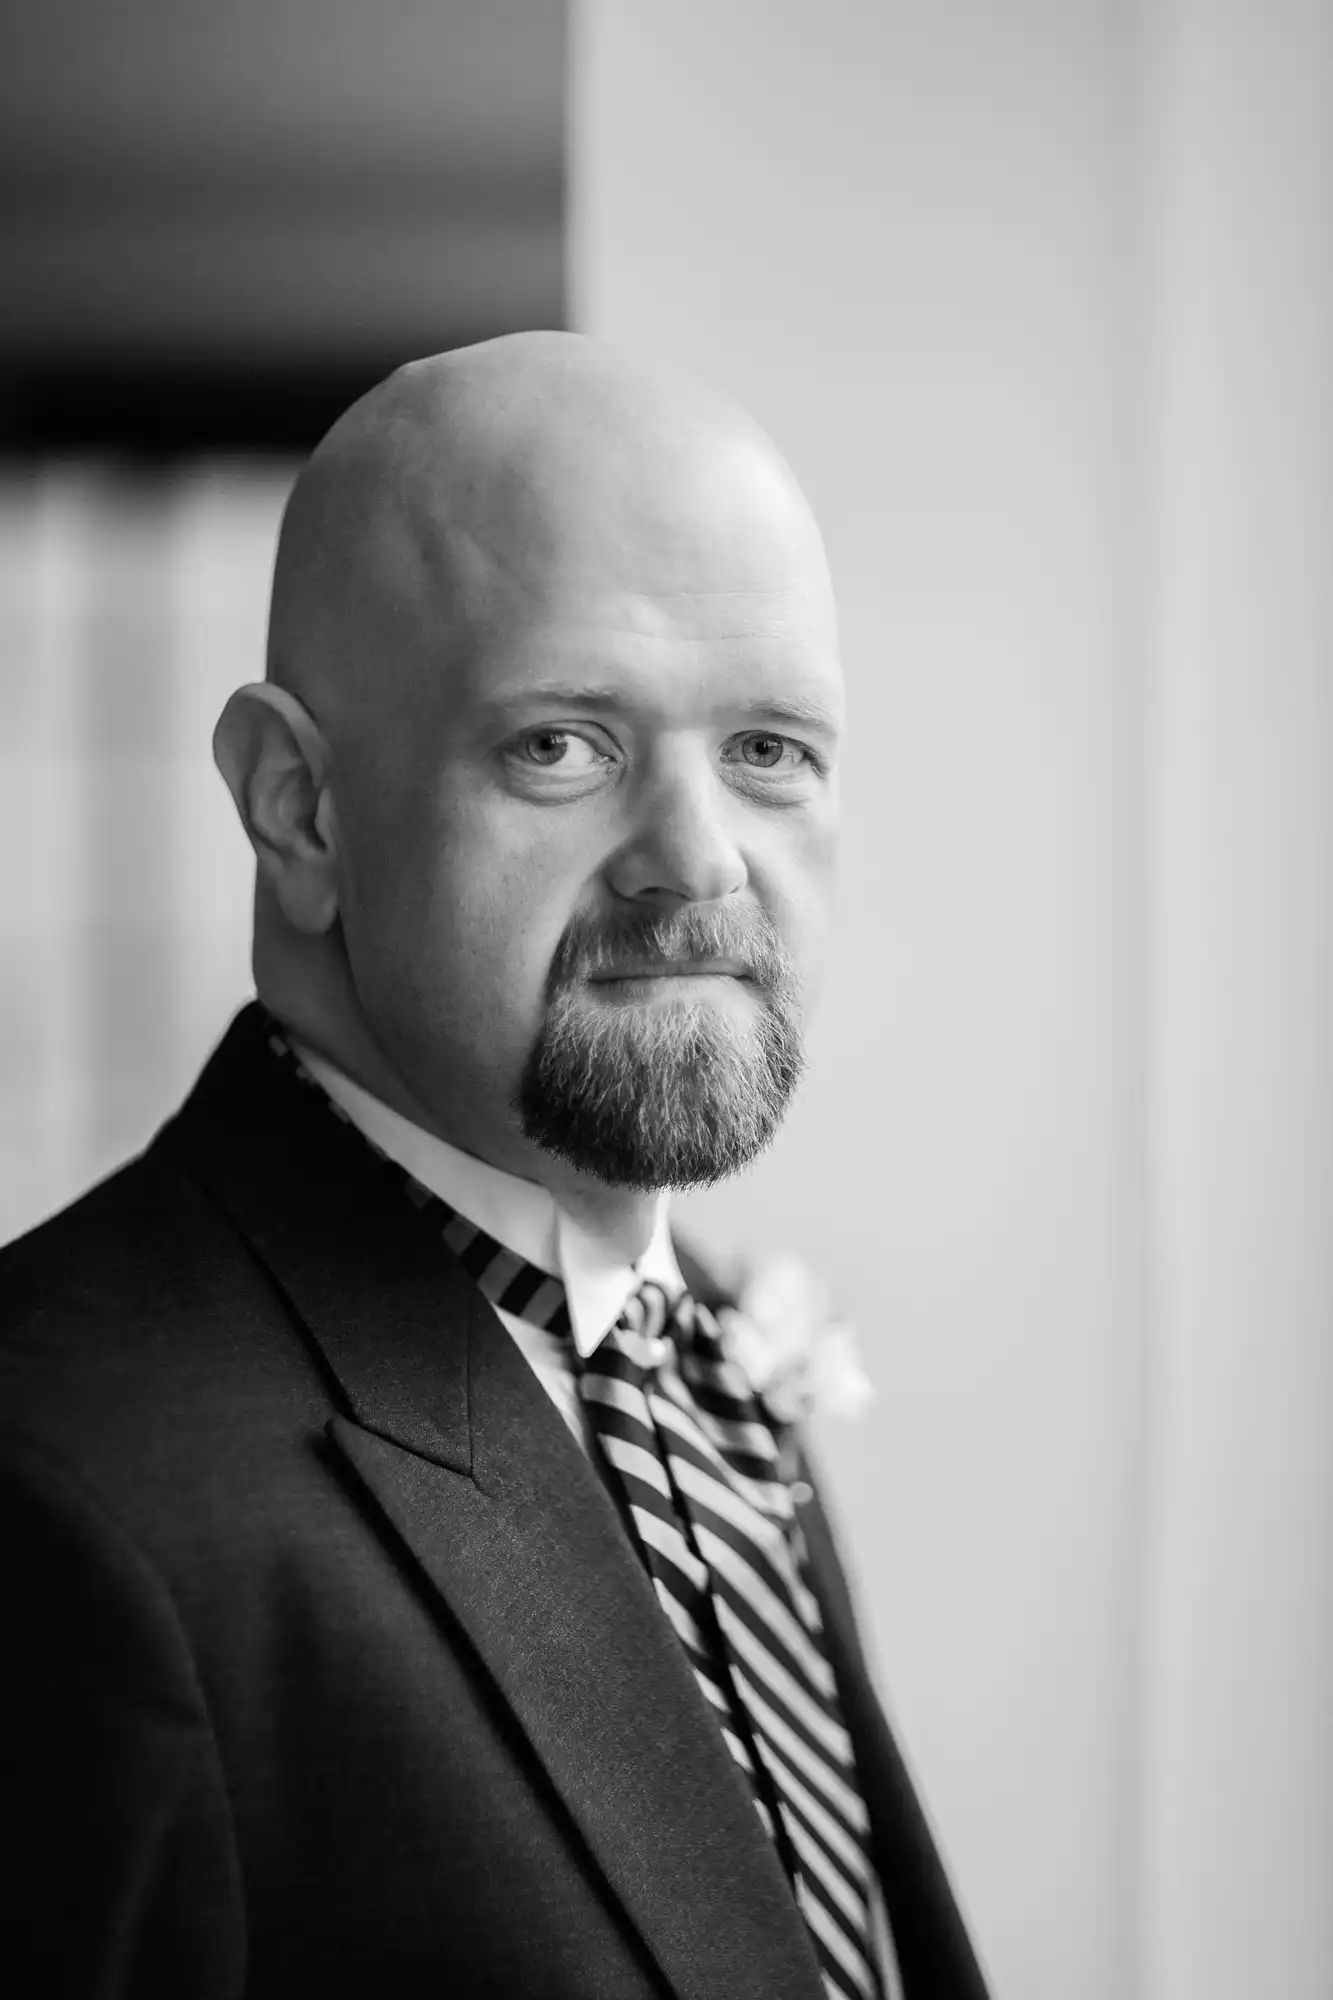 Black and white portrait of a bald man with a beard, wearing a suit and striped tie, looking directly at the camera.